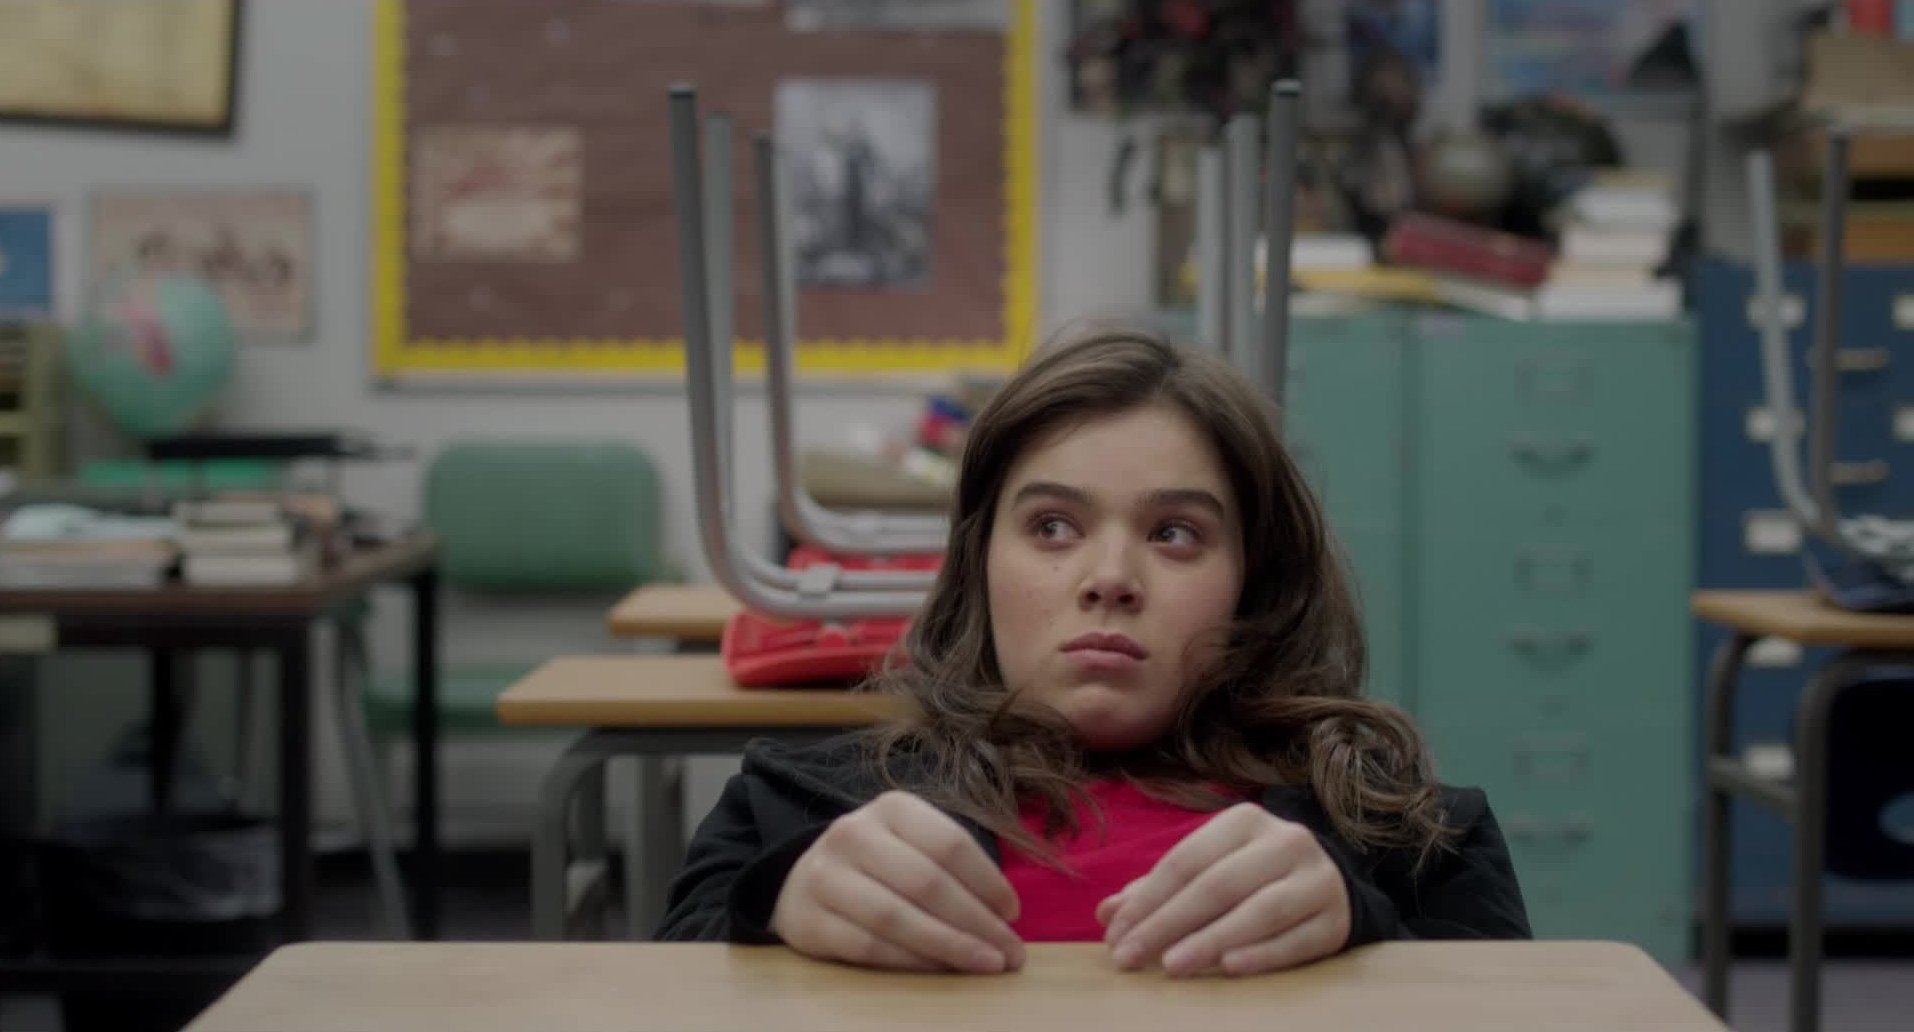 Nadine looks annoyed as she slouches in a school desk in a scene from 'The Edge of Seventeen.'